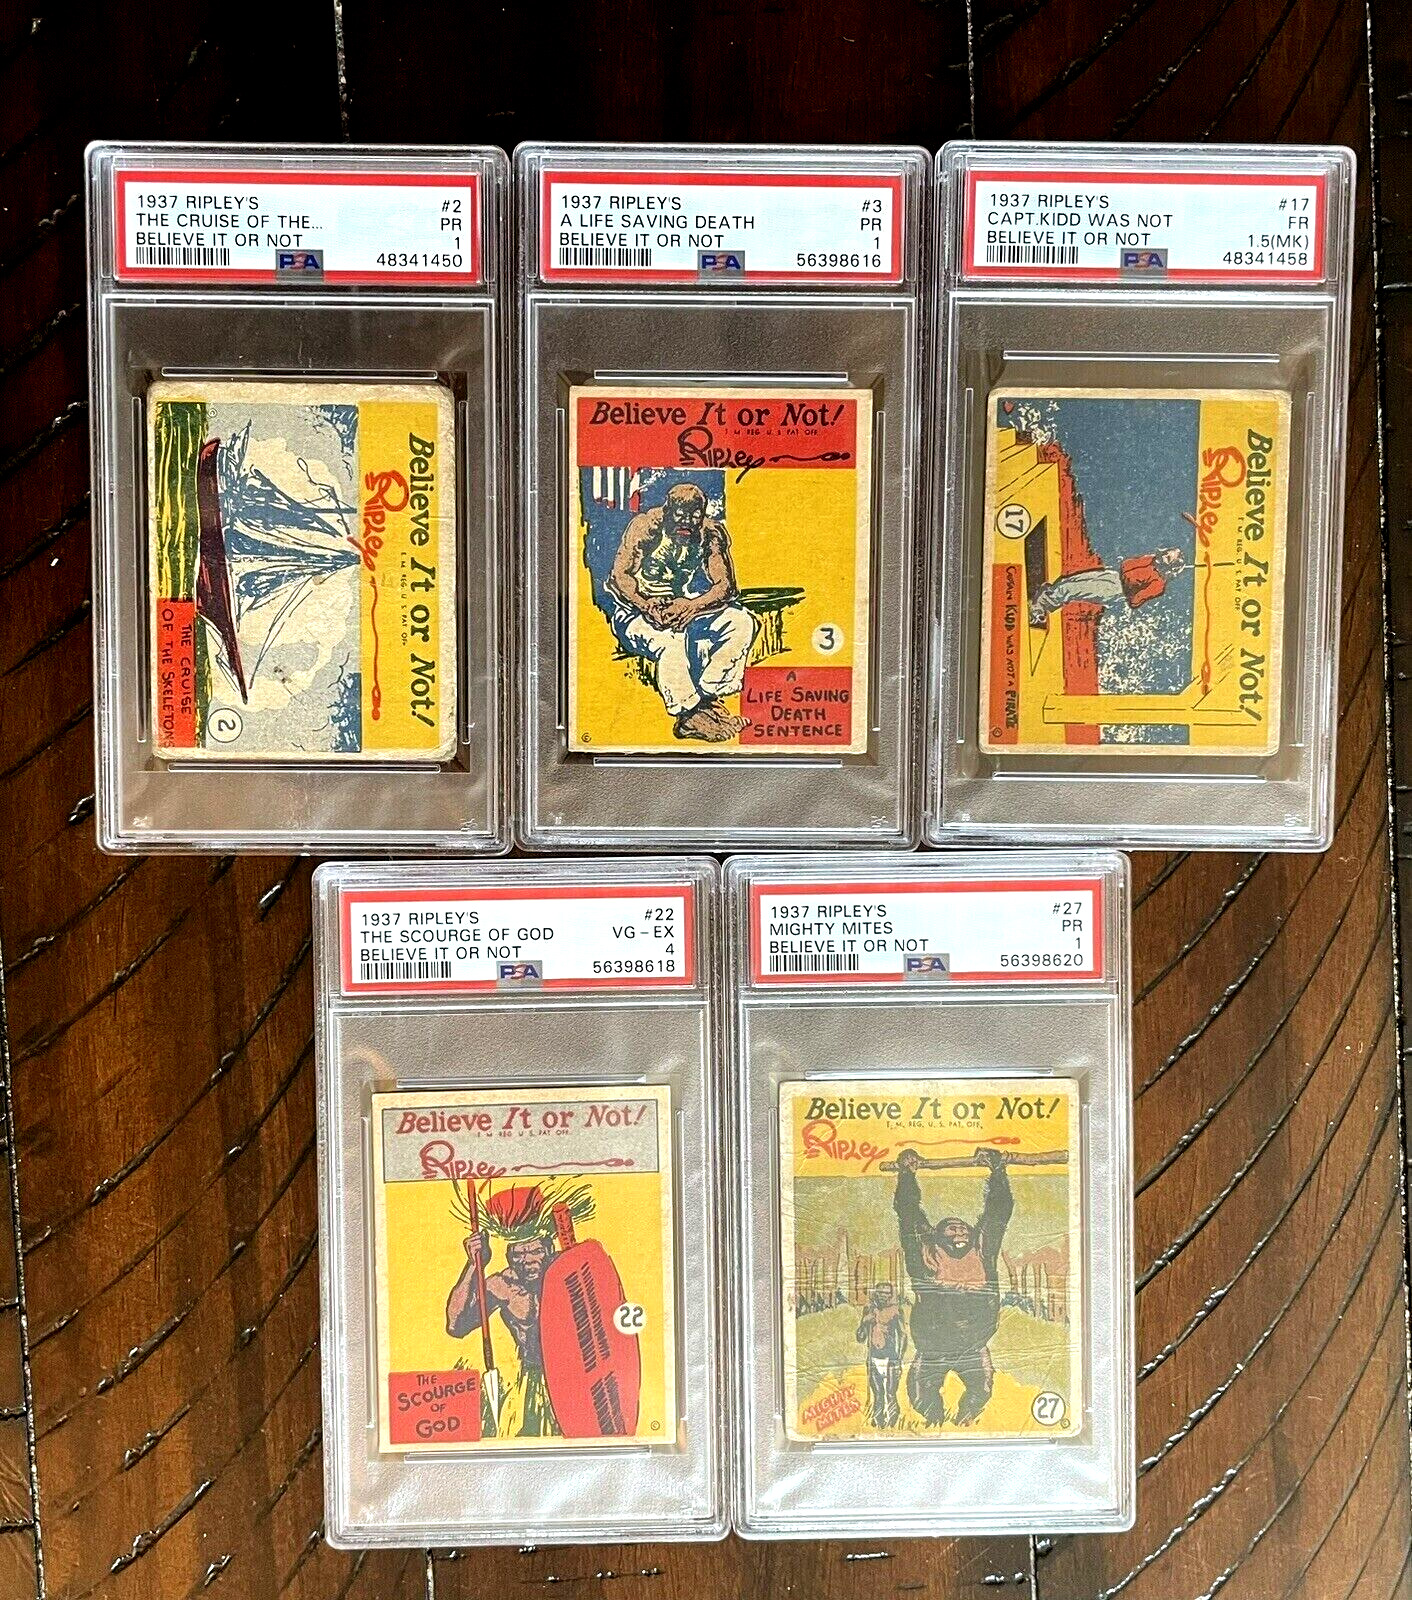 RARE 1937 Ripley's Believe It Or Not - Lot of 5 PSA Graded Cards - Including #27